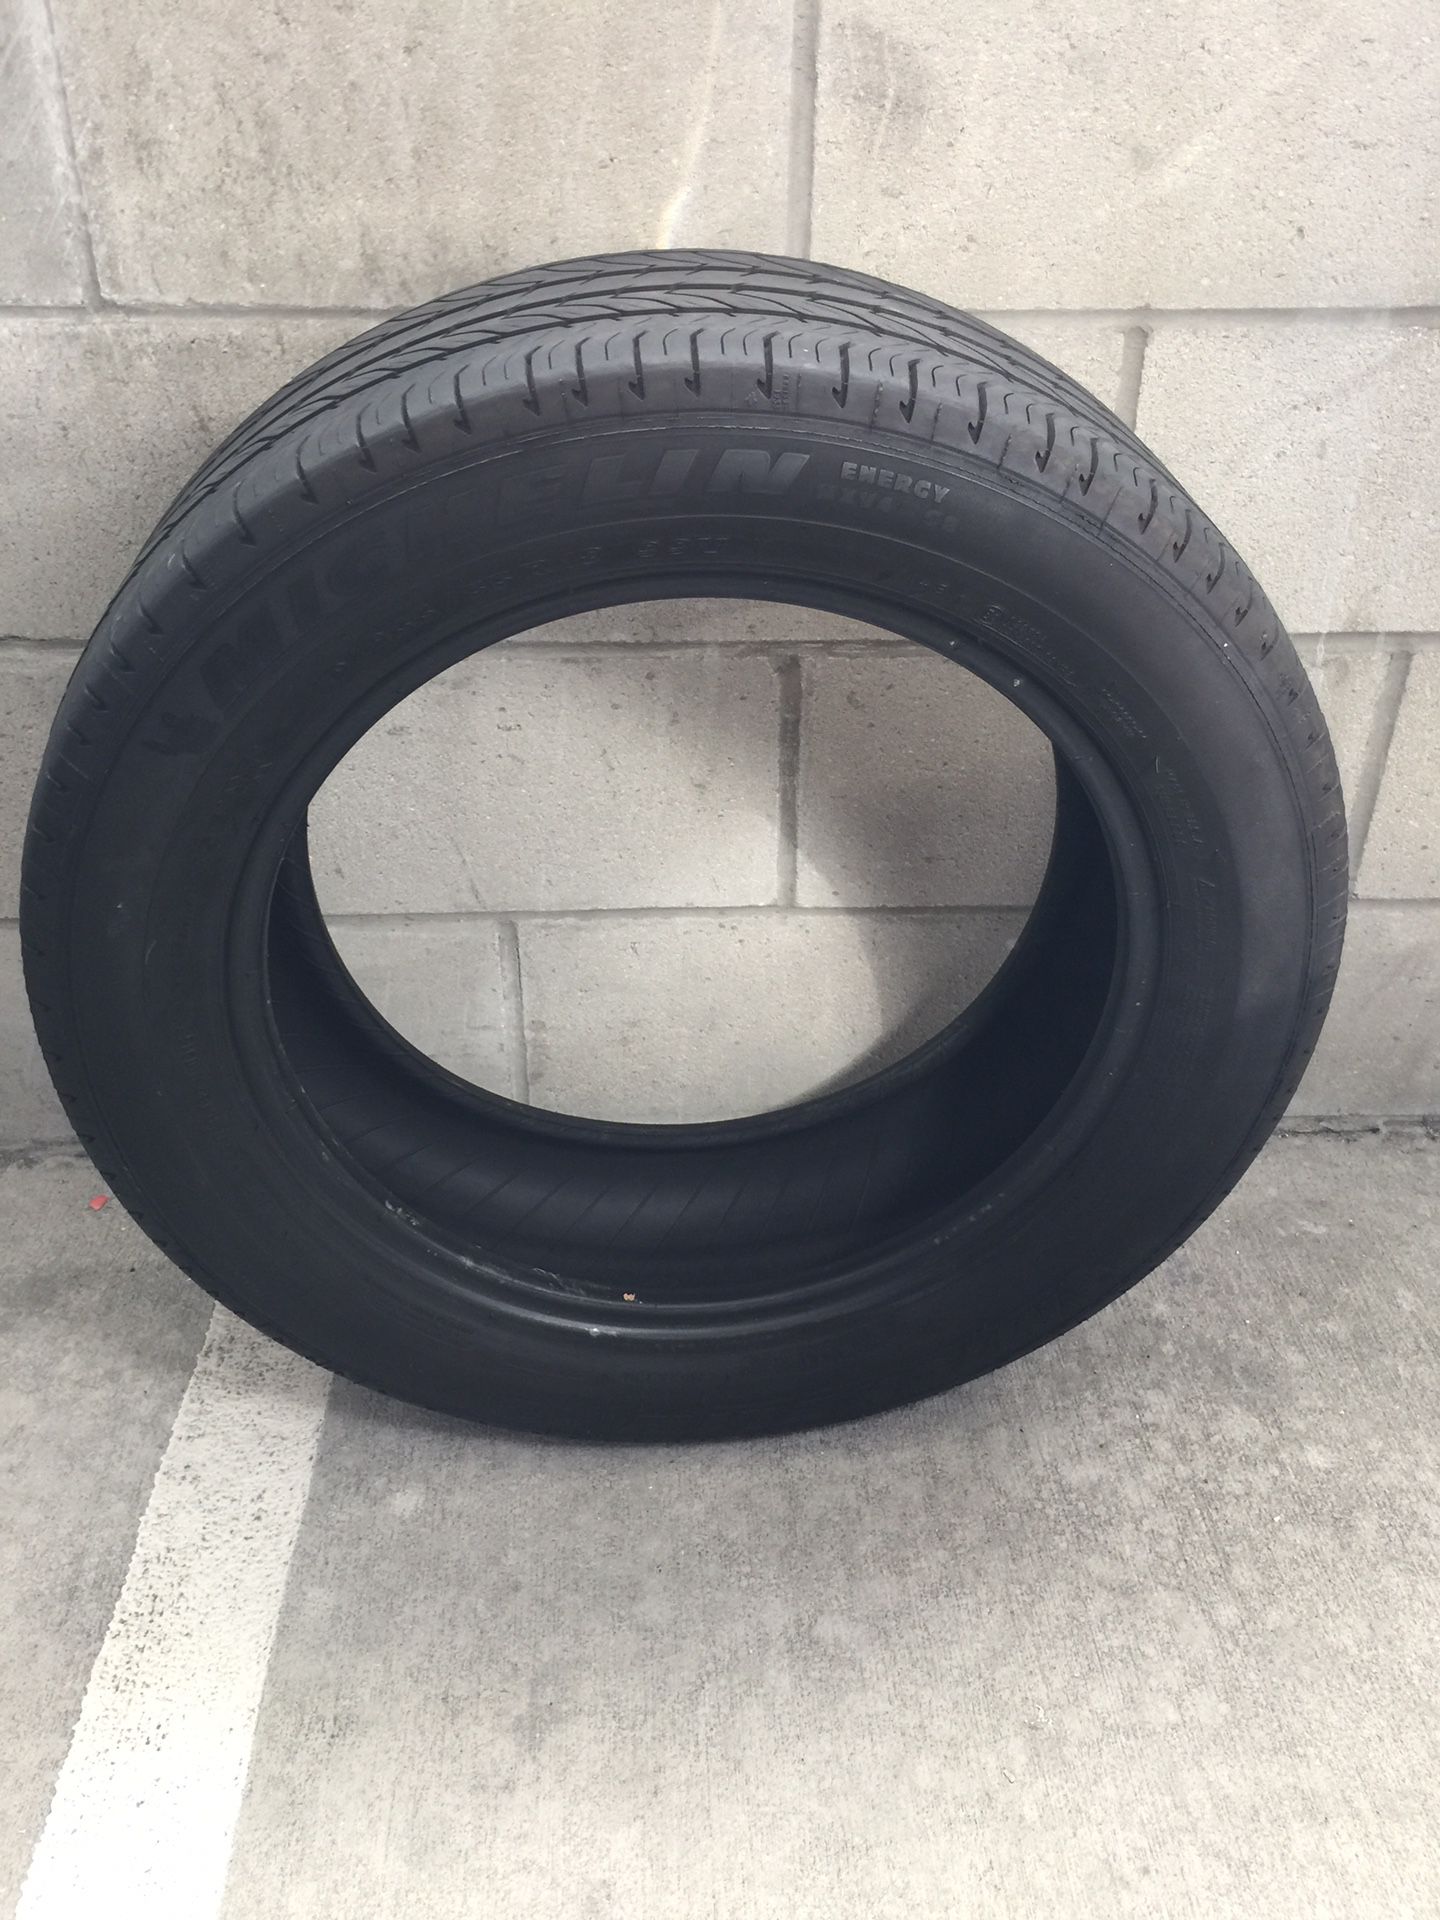 2 Michelin Energy Tires in Good Condition P235/55 R18